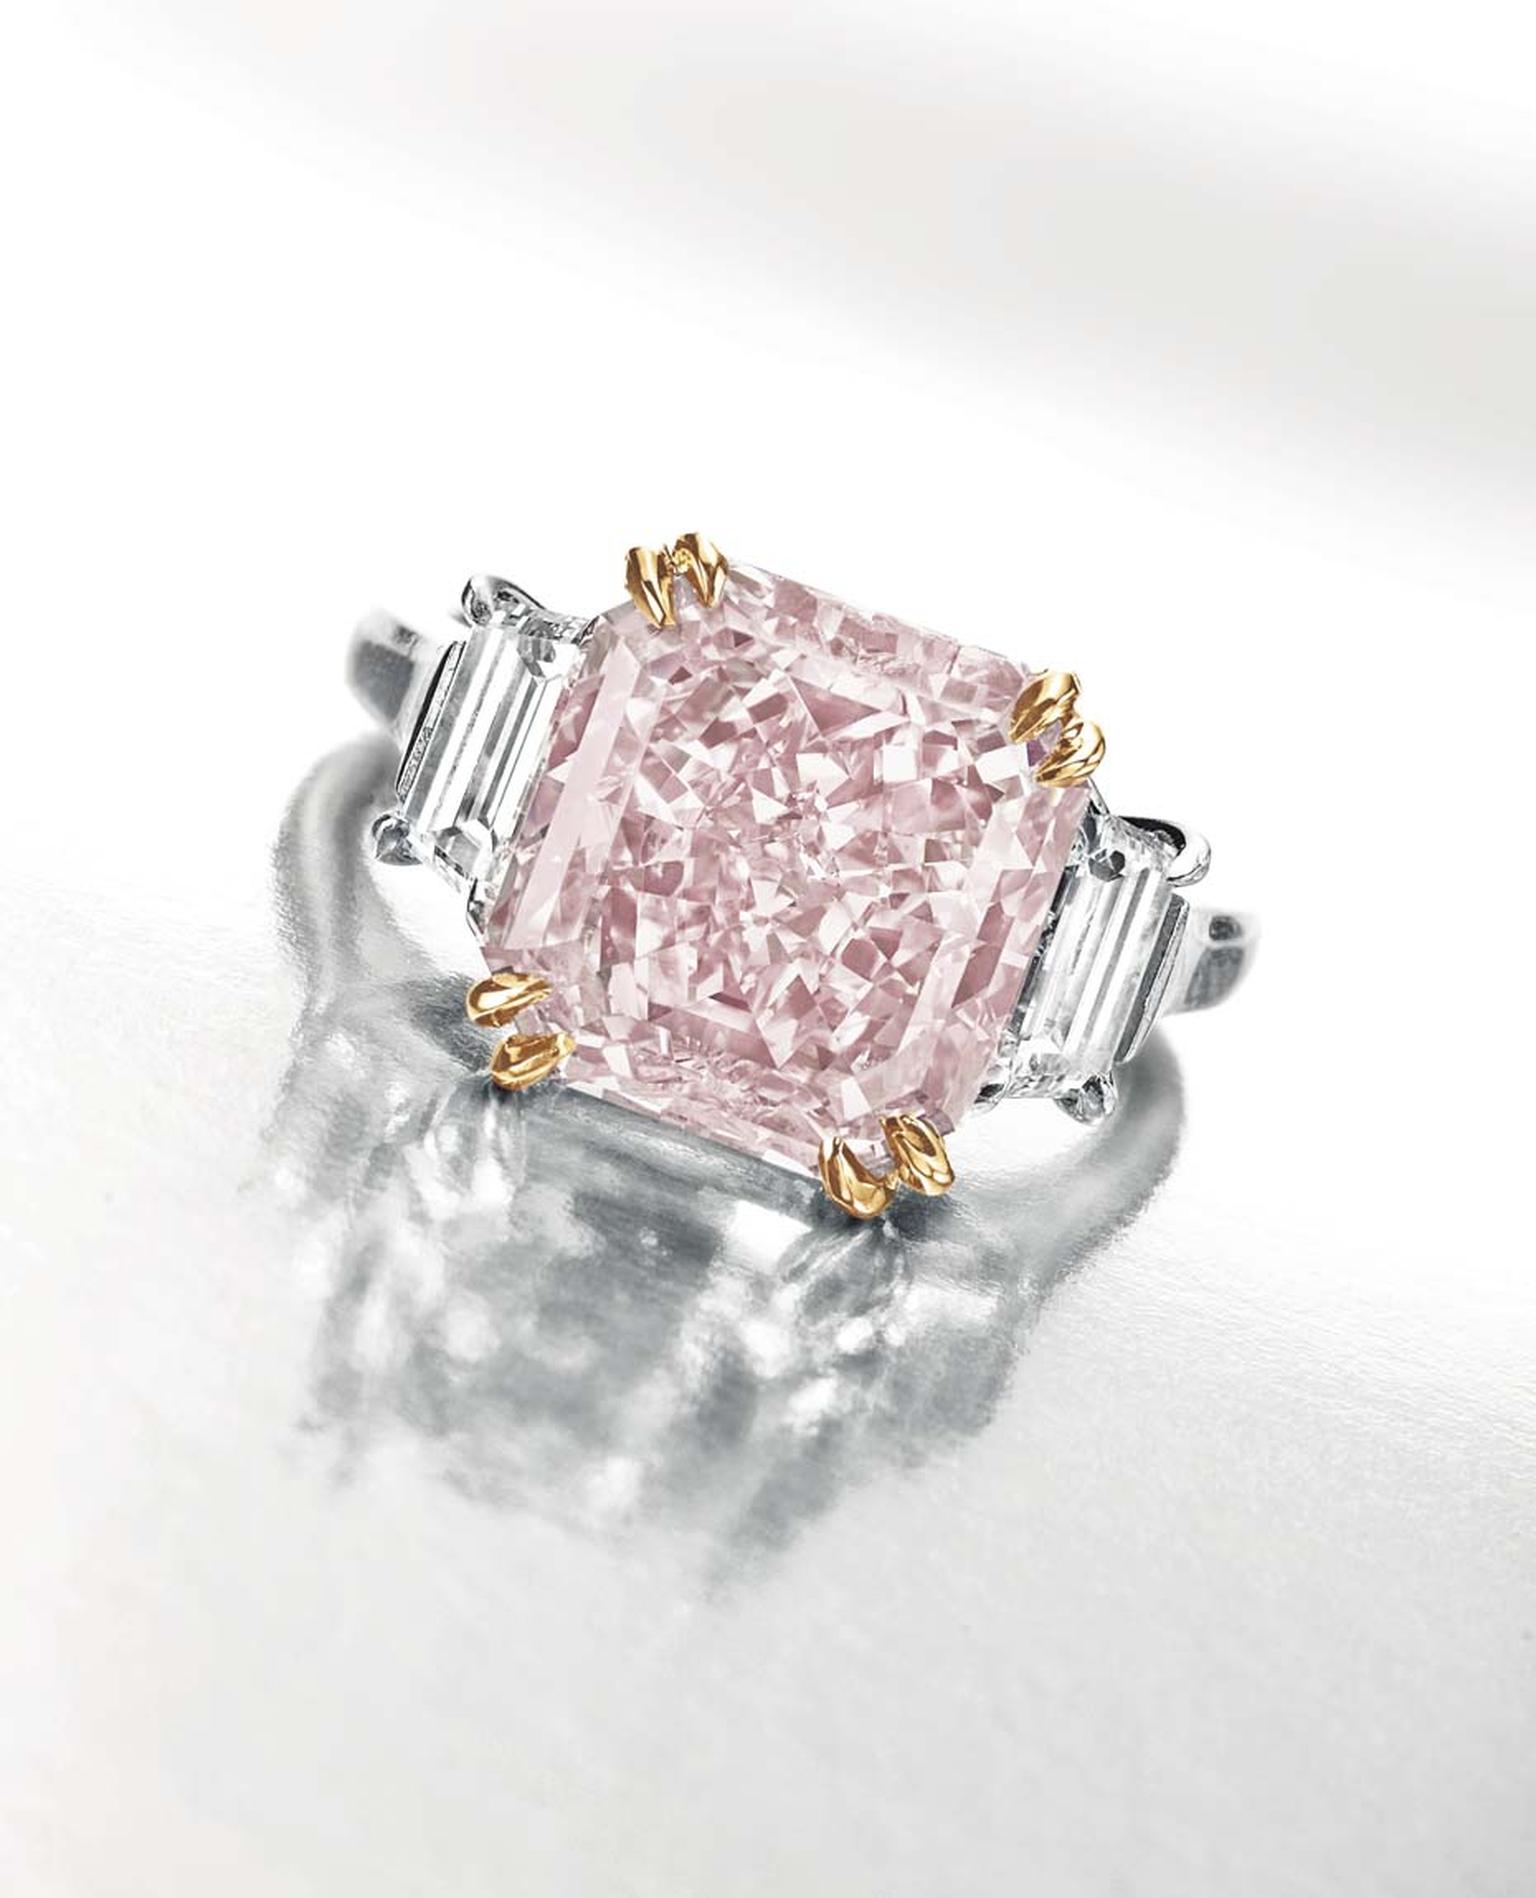 Lot 131, an important coloured diamond and diamond ring in platinum and rose gold by Harry Winston, set with a rectangular-cut fancy intense pink diamond weighing approximately 6.10ct, from the private collection of animal rights campaigner Riki Shaw (est